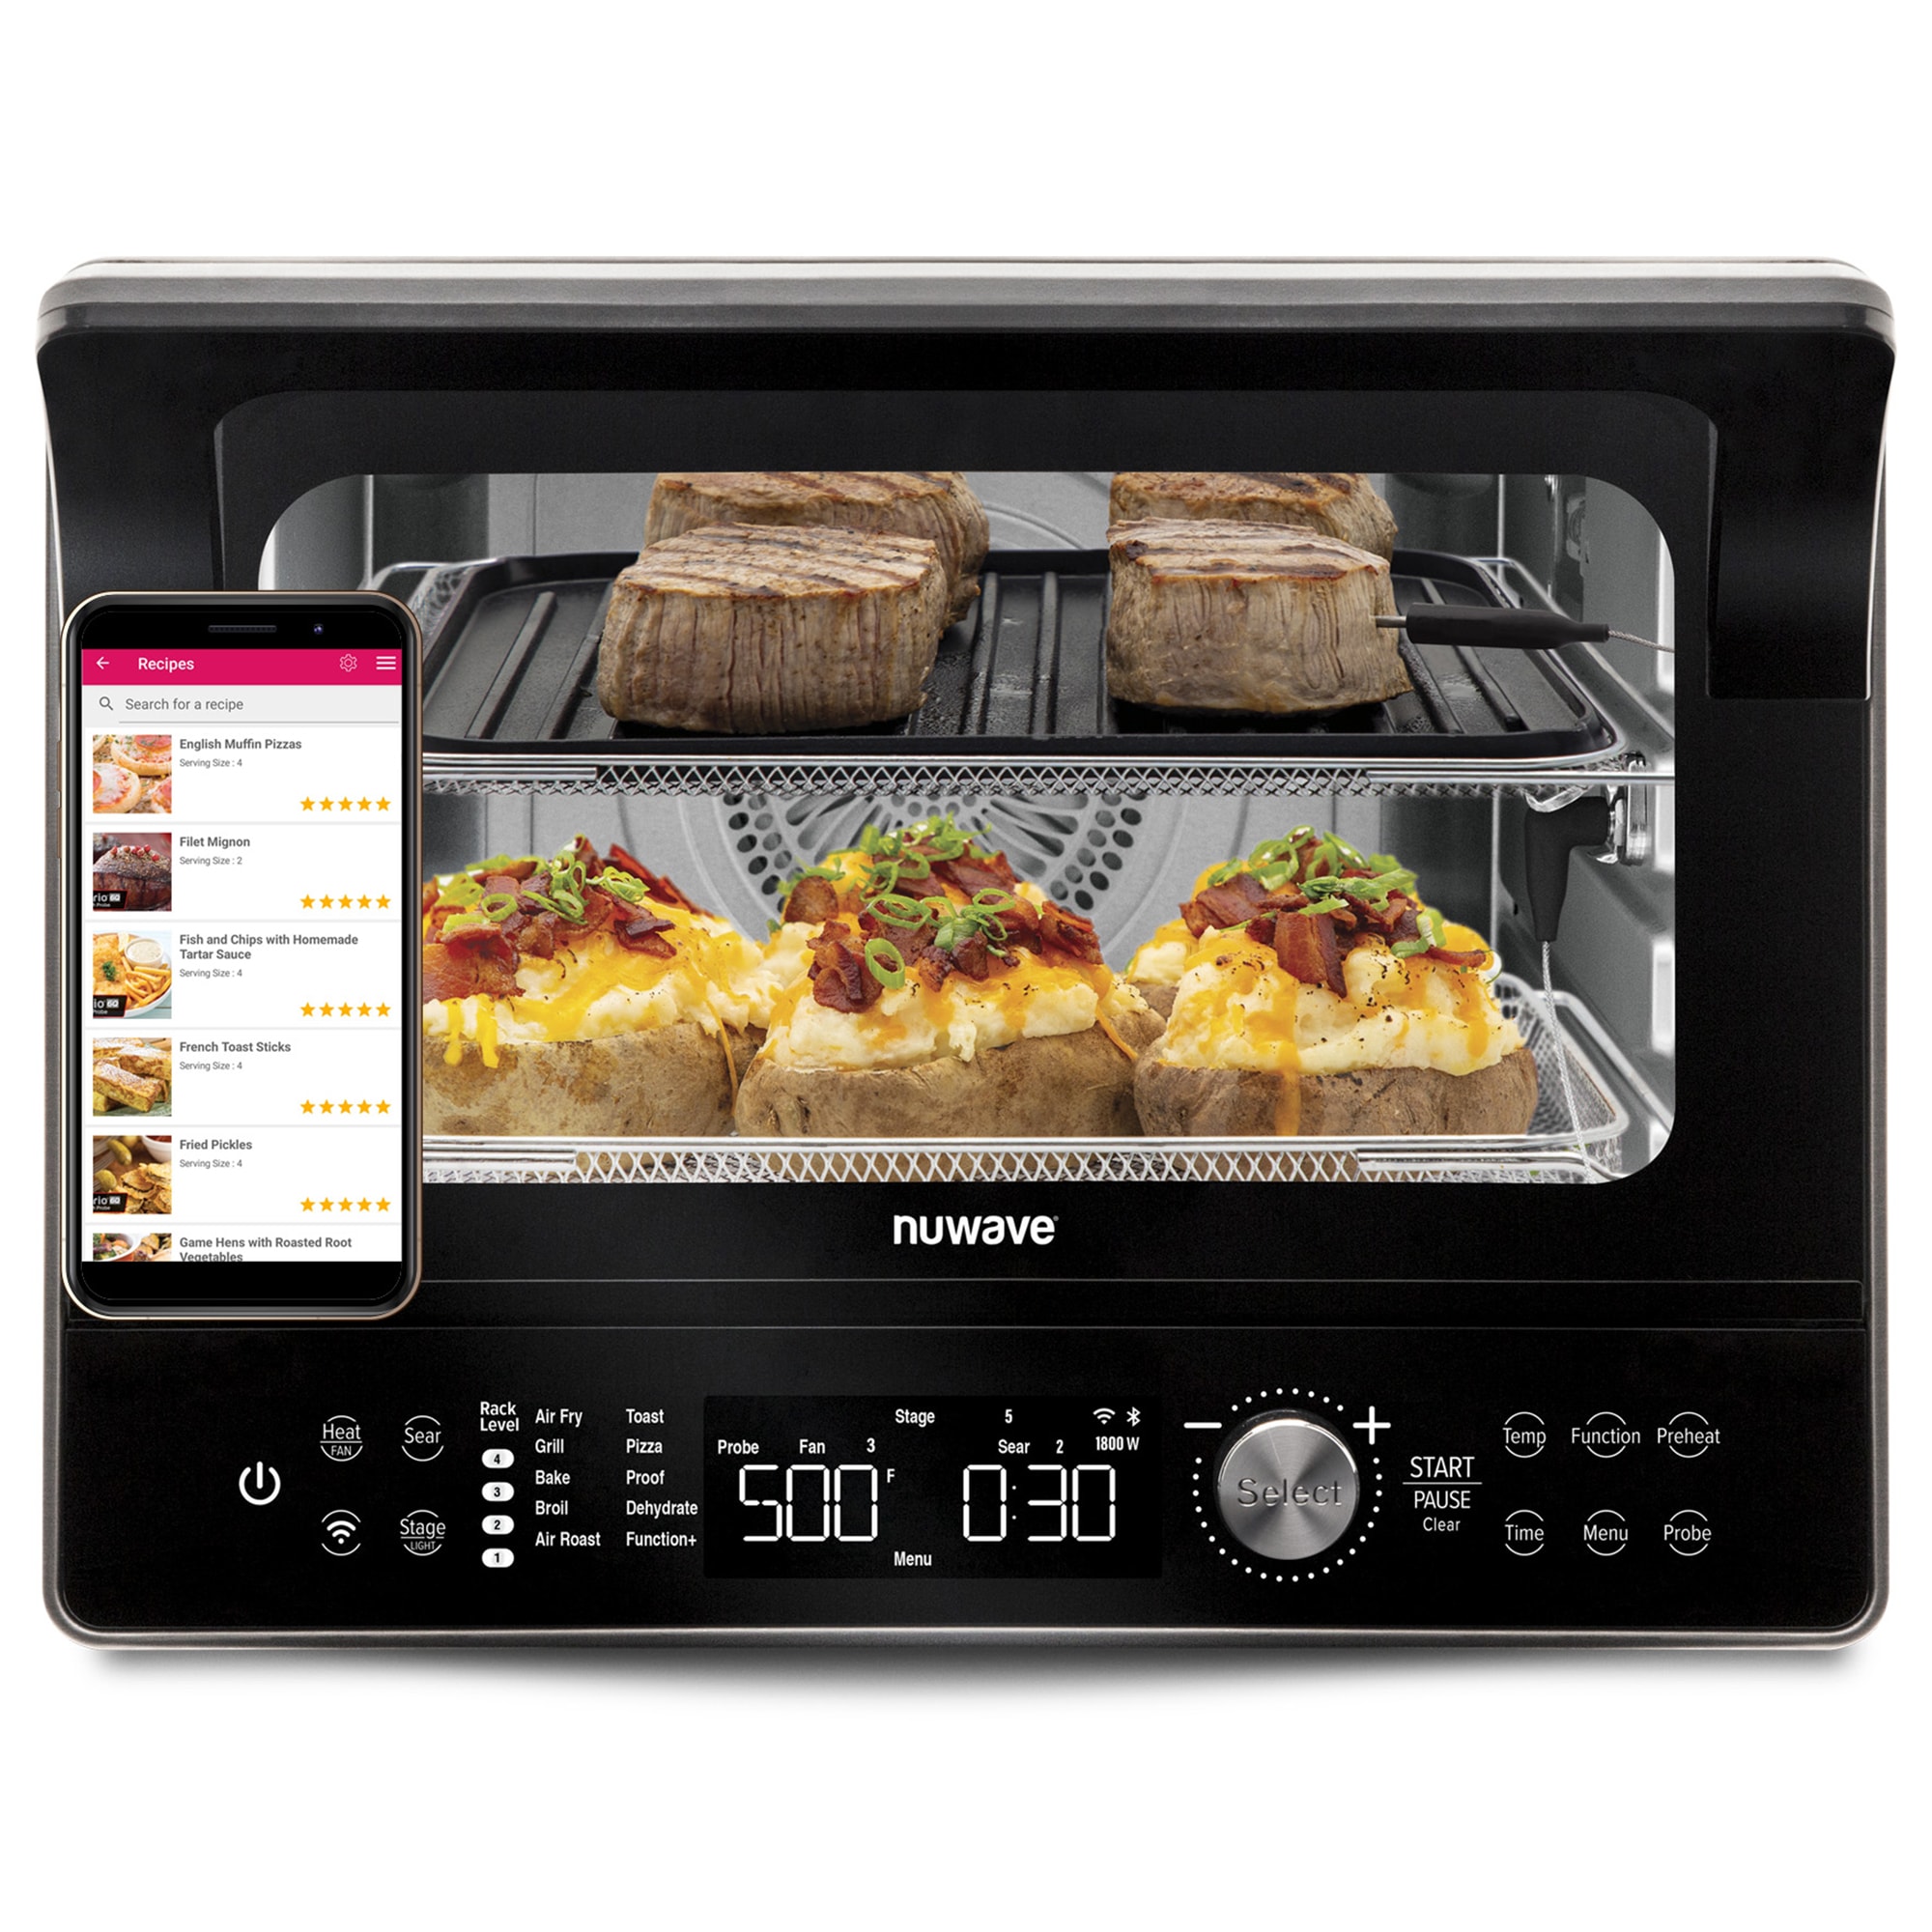 NuWave Todd English Air Fryer Toaster Oven with Pro-Smart Grill, Plug-In Grill & Air Fryer, 550F Preheat, 50-500f Temperature Controls, Top and Bottom